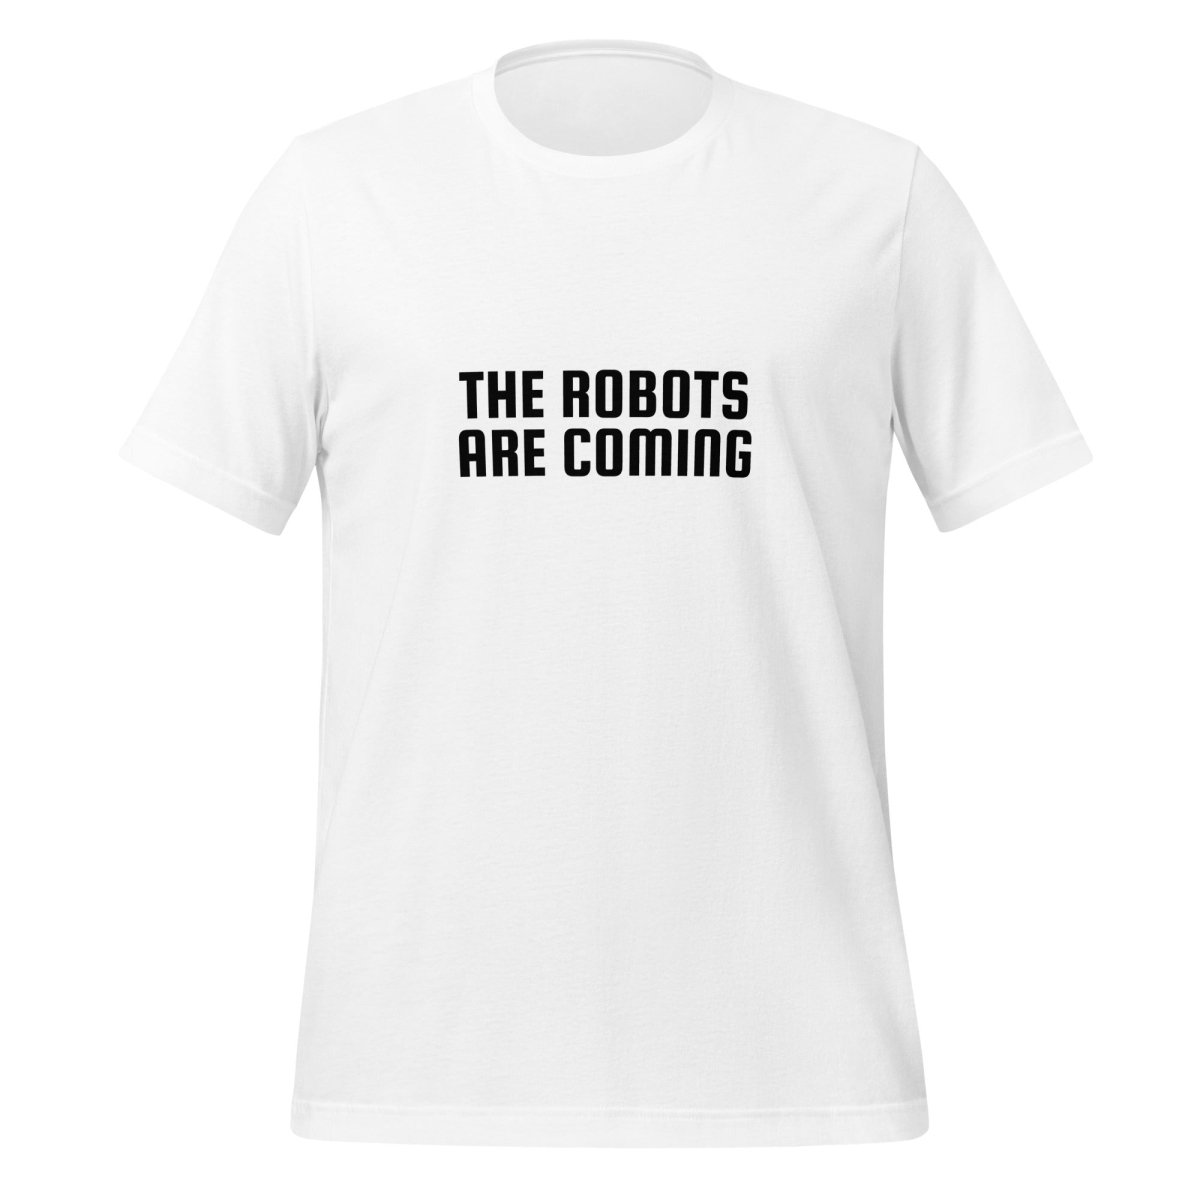 The Robots Are Coming in Black T - Shirt 2 (unisex) - White - AI Store